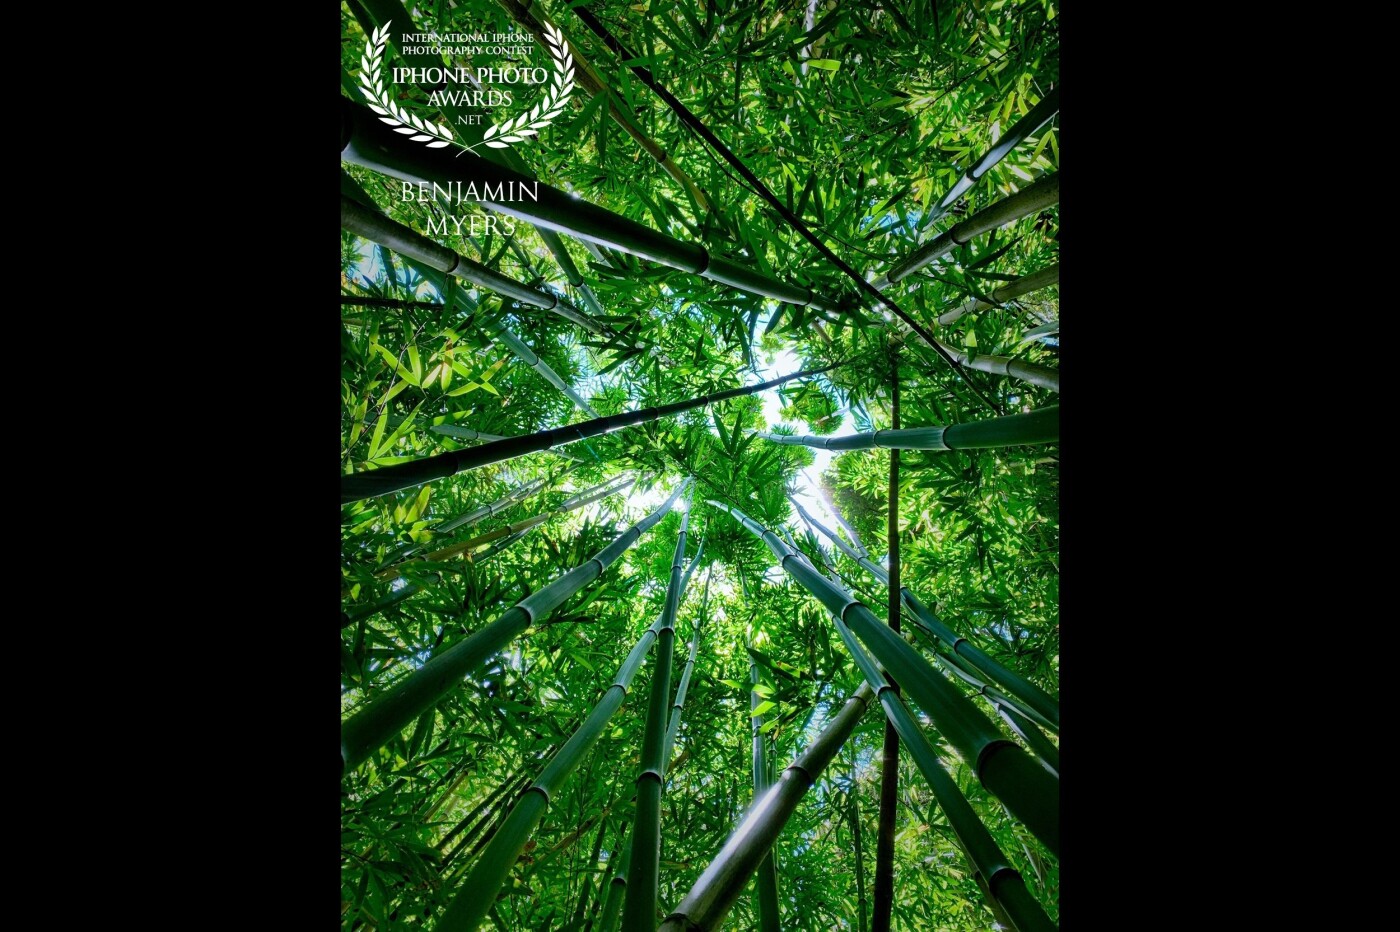 I was hiking in the Nu’uanu Valley on Oahu when we walked into a bamboo forest. There were a lot of young bamboos. I stopped to listen to the wind whip through the trees causing them to sway back and forth and collide. As I looked up to watch the tops of the trees and saw the sky peeking through, I thought it was picture perfect, so I pulled out my iPhone and snapped a few shots. 